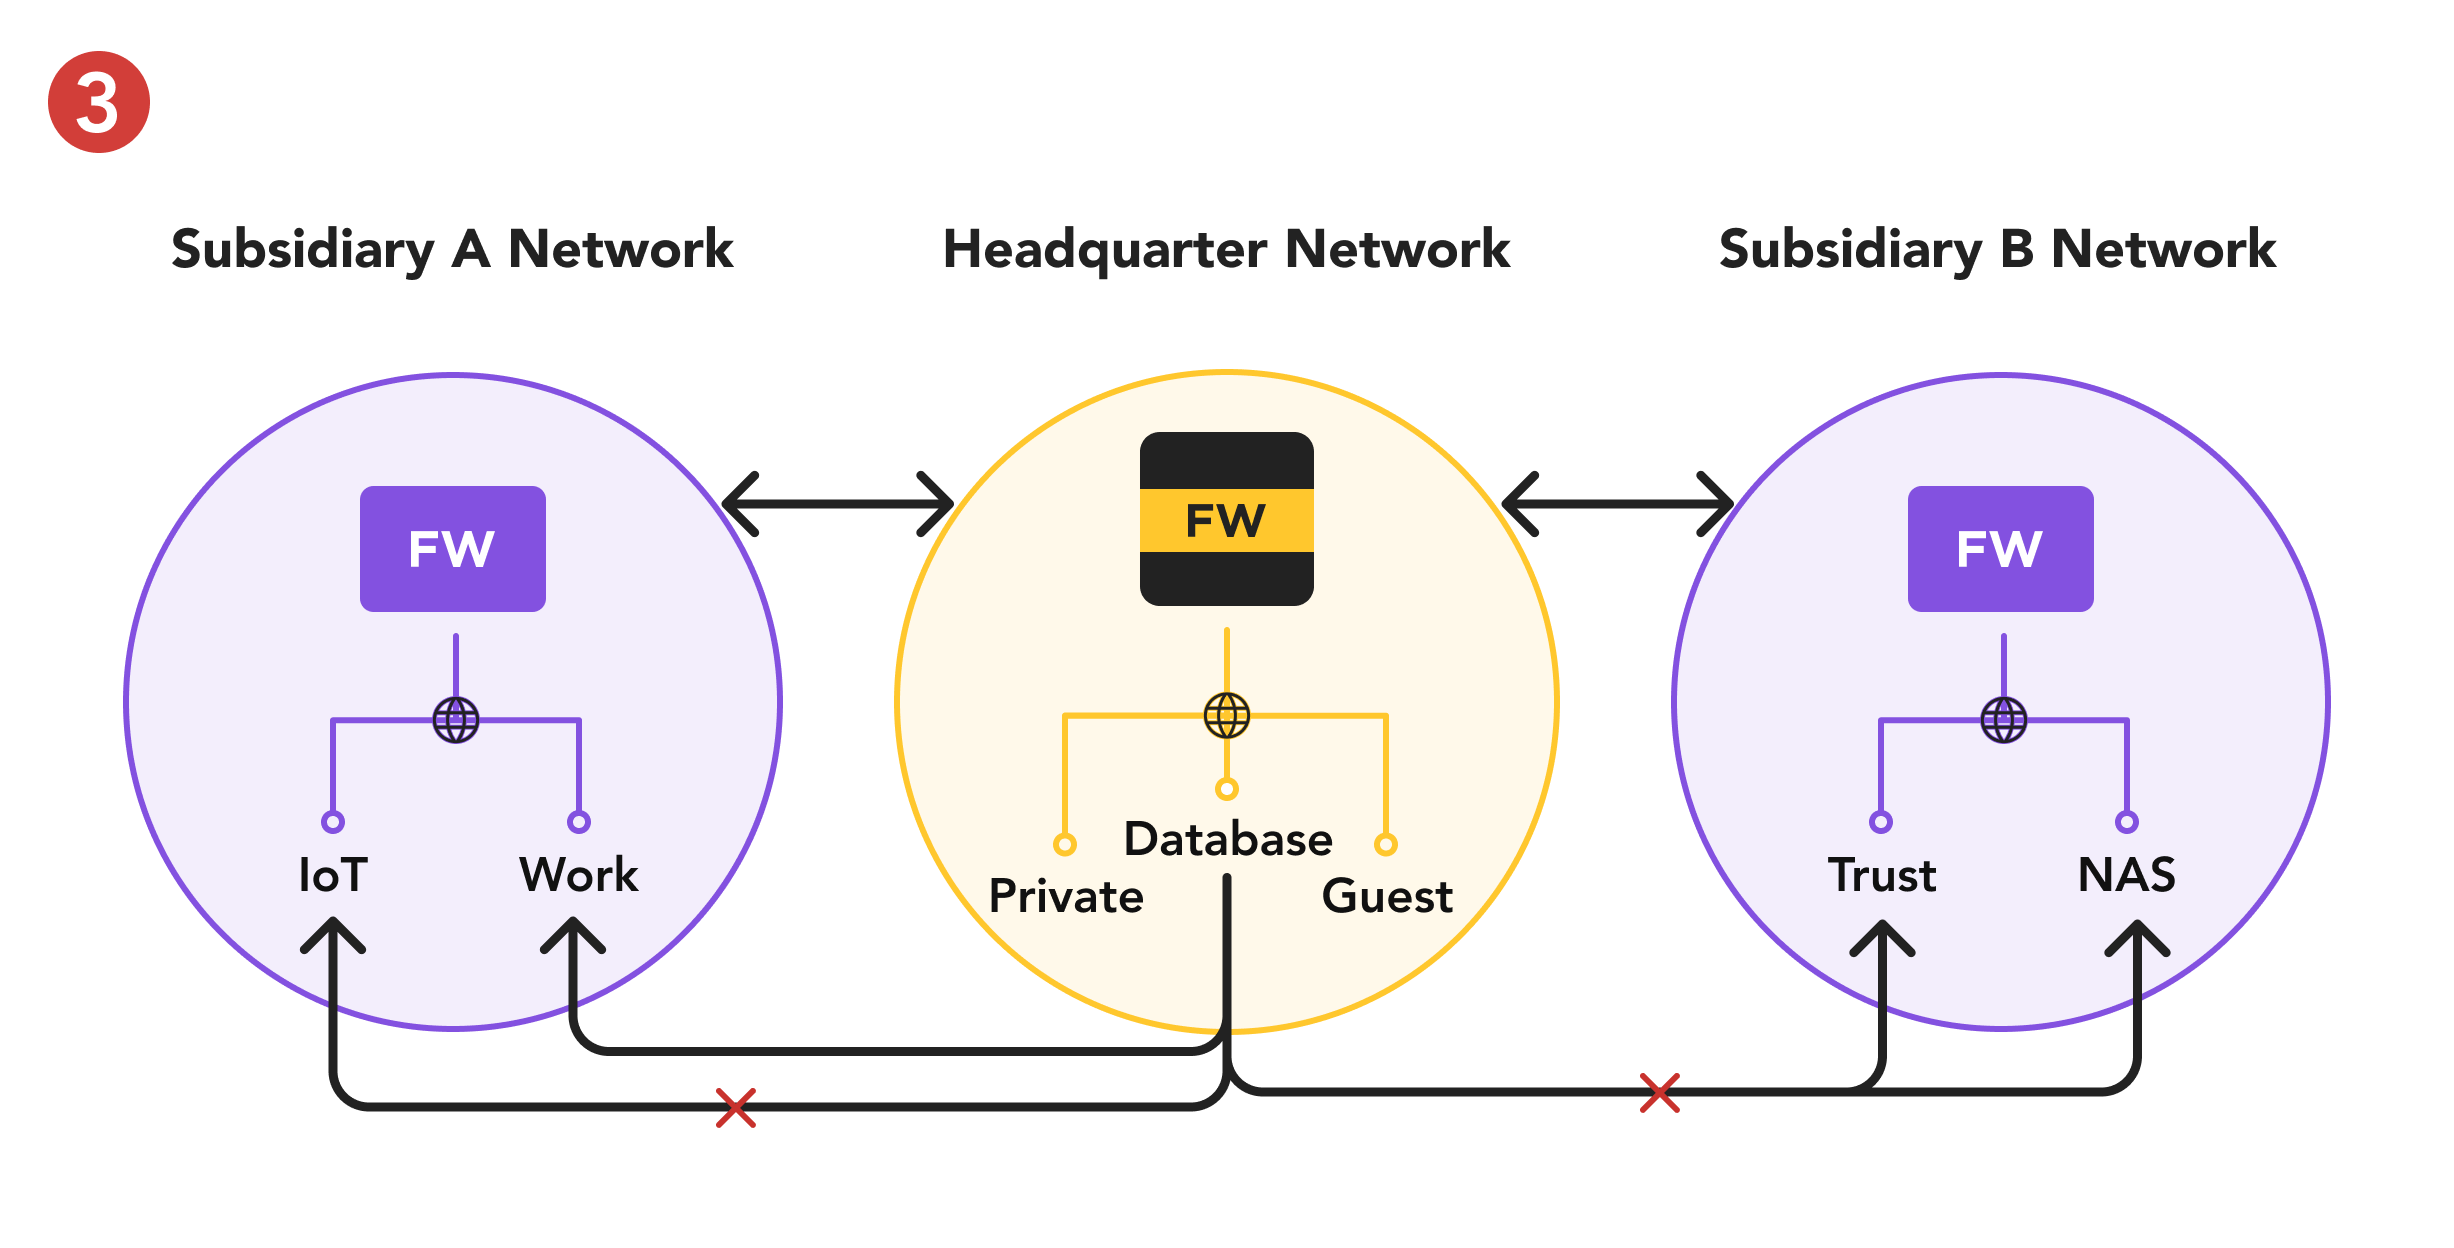 Site to Site VPN - Headquarter Network with Database only being only able to access the Work in Subsidiary A.